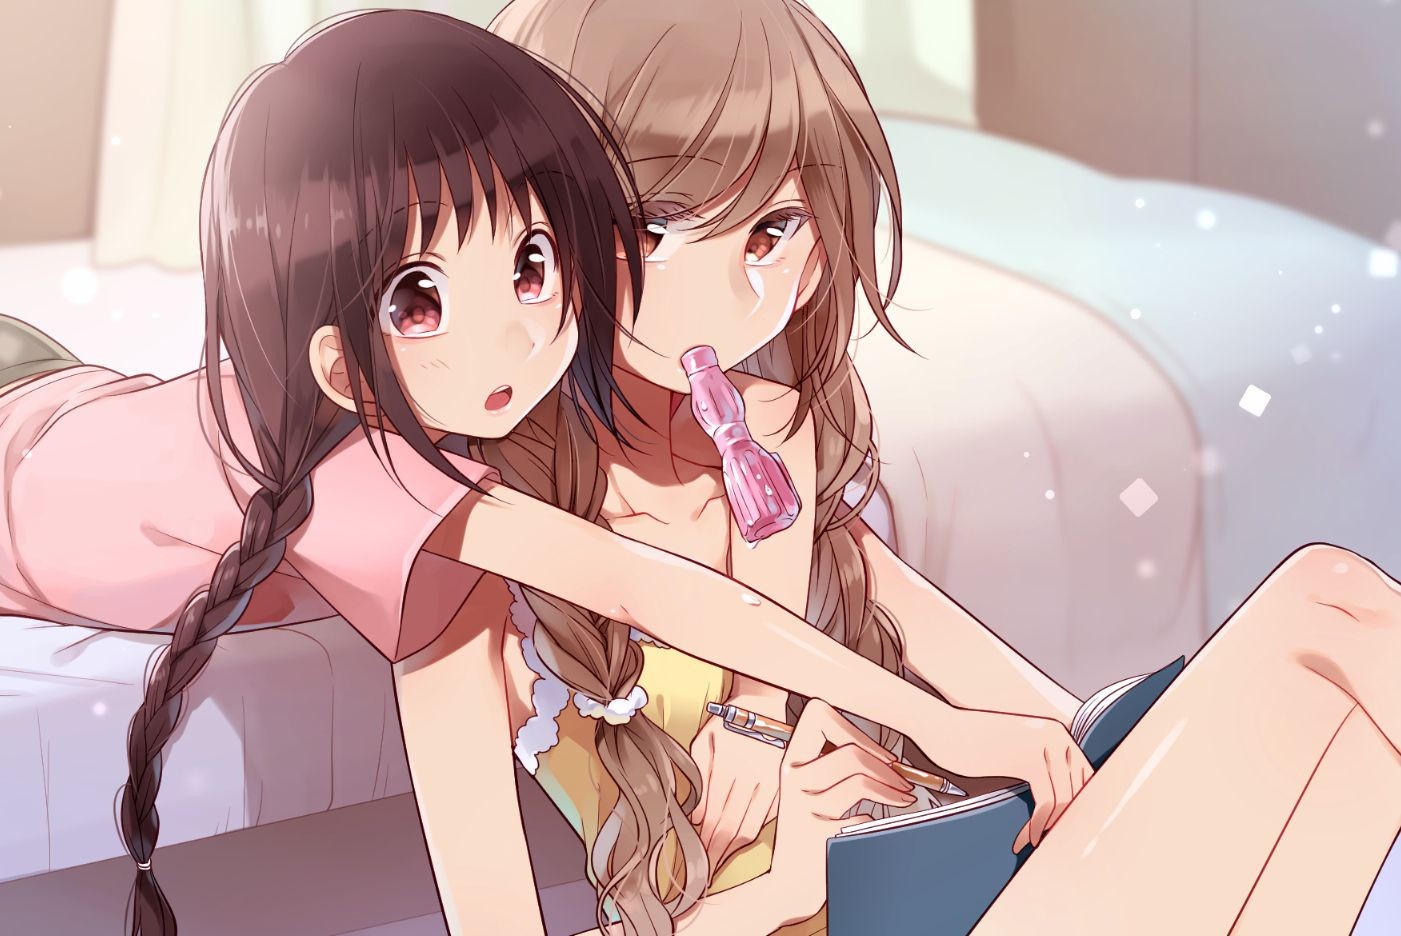 Fuck For Money [Secondary-ZIP: Yuri Lesbian Image, Or See Other Girls Doing Naughty Things. Orgia